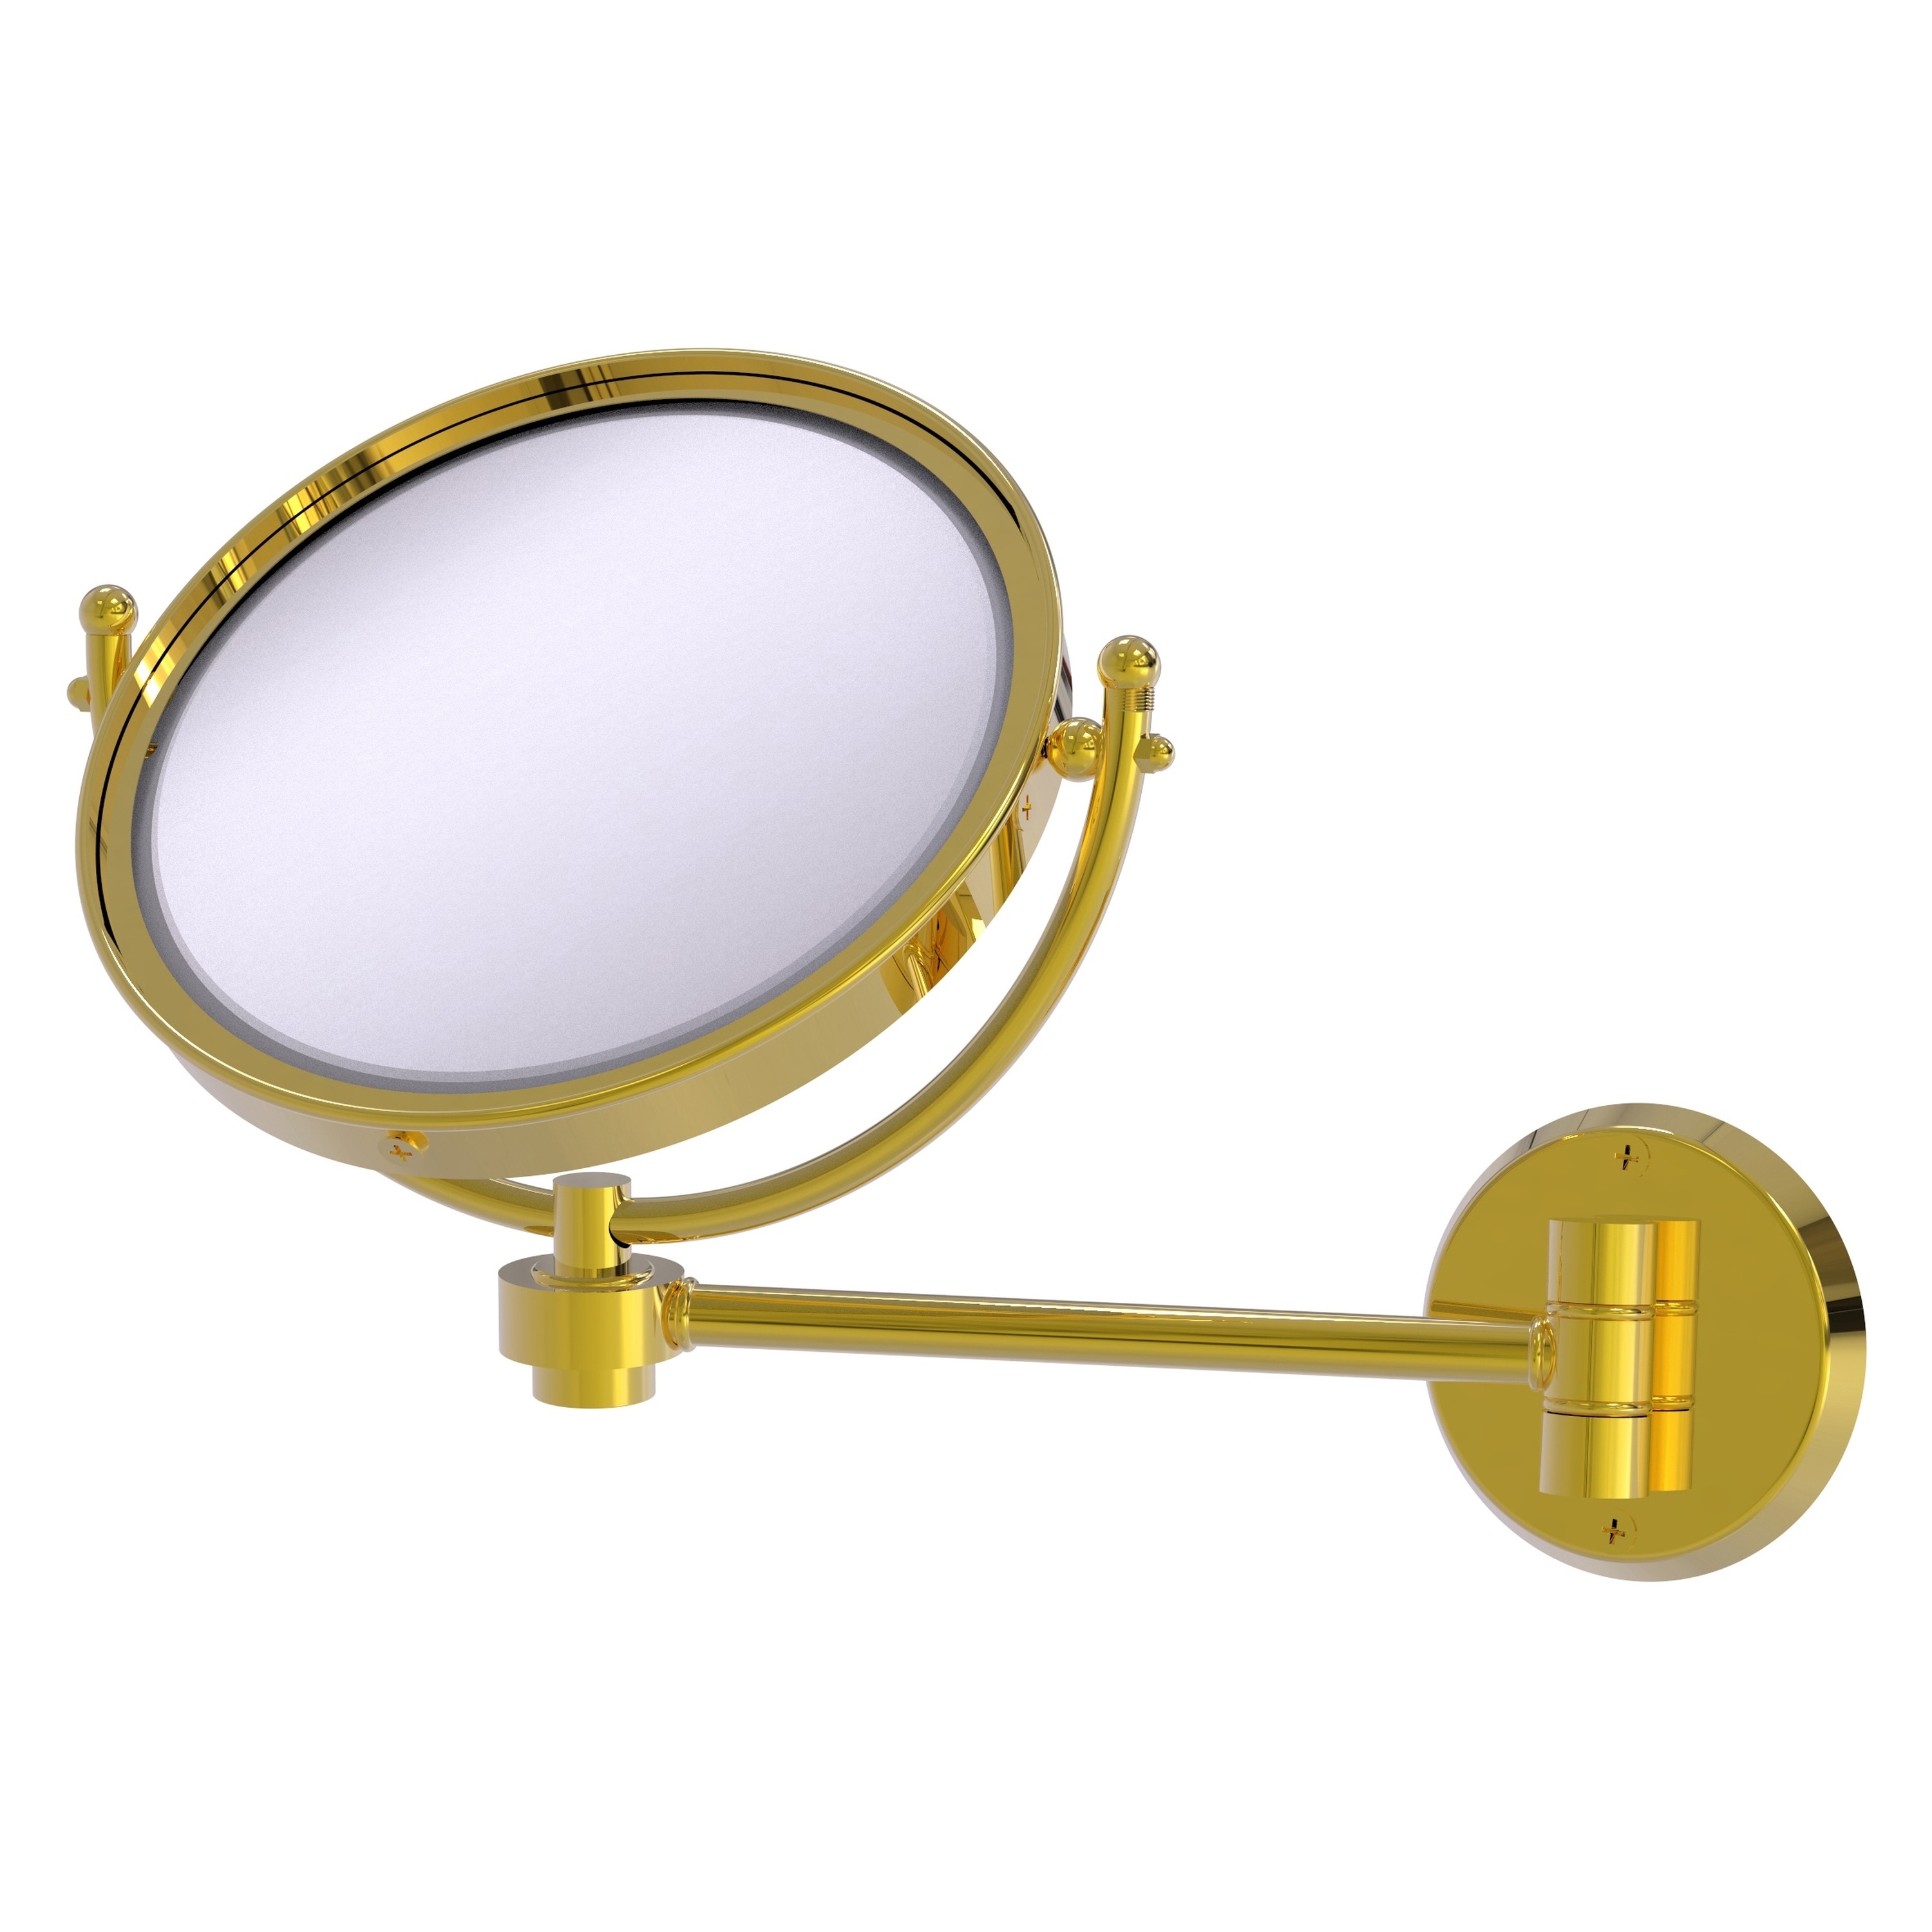 8-in x 10-in Polished Silver Double-sided 2X Magnifying Wall-mounted Vanity Mirror | - Allied Brass WM-5/2X-PB